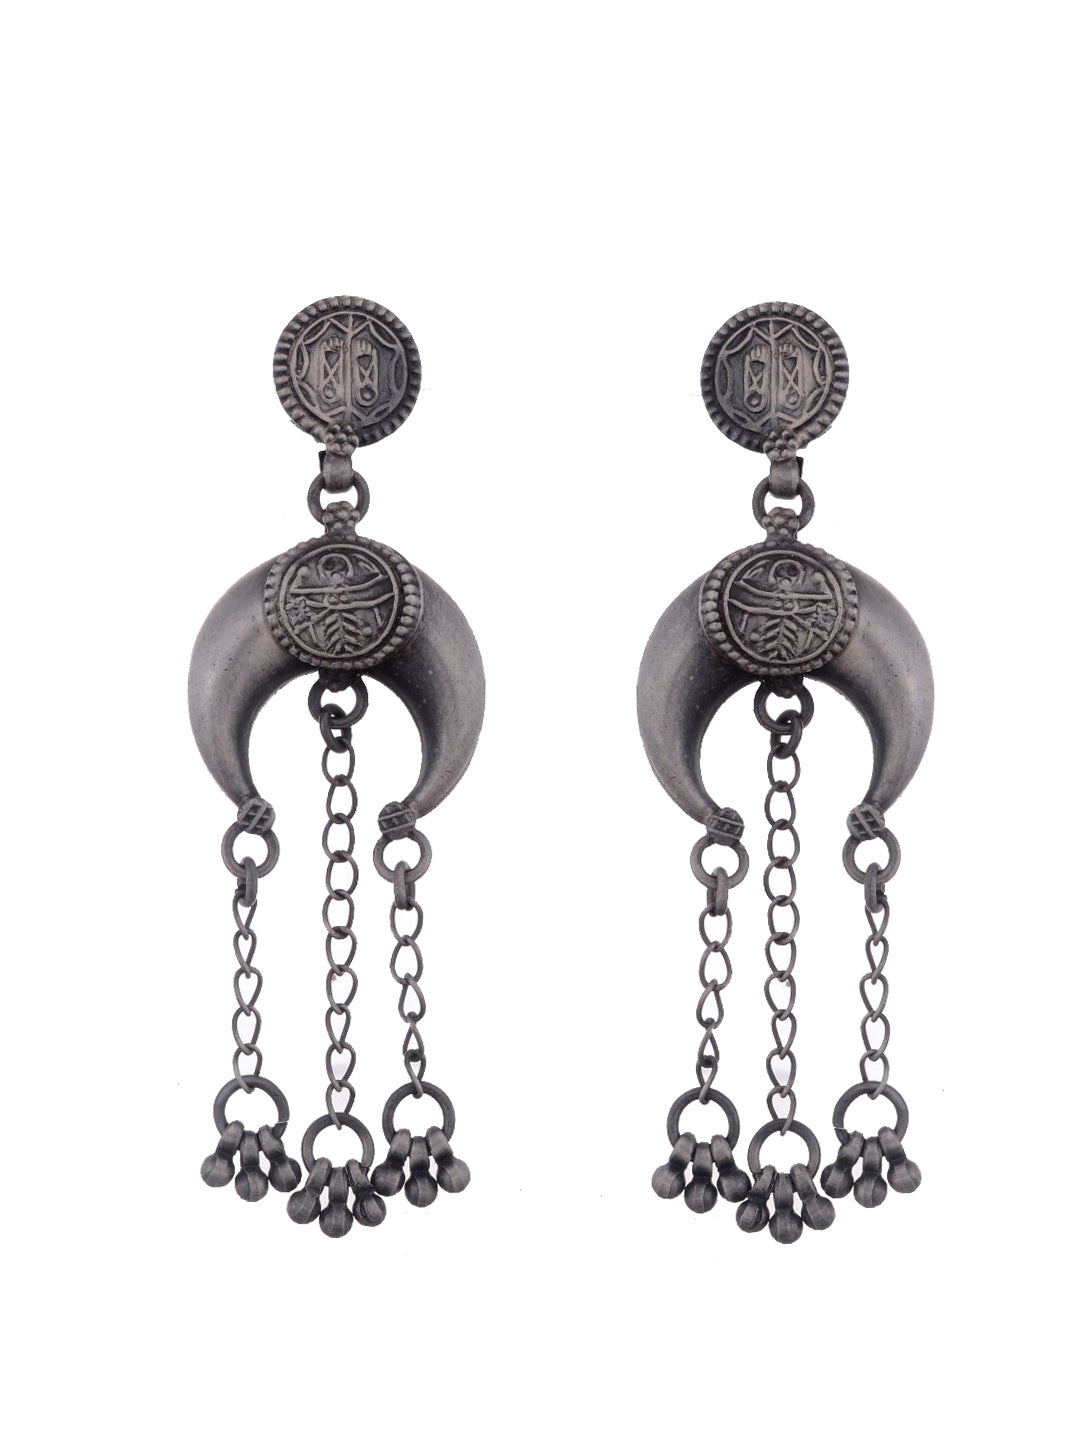 92 5 Sterling Silver Drop Earrings With Oxidised Silver Plating